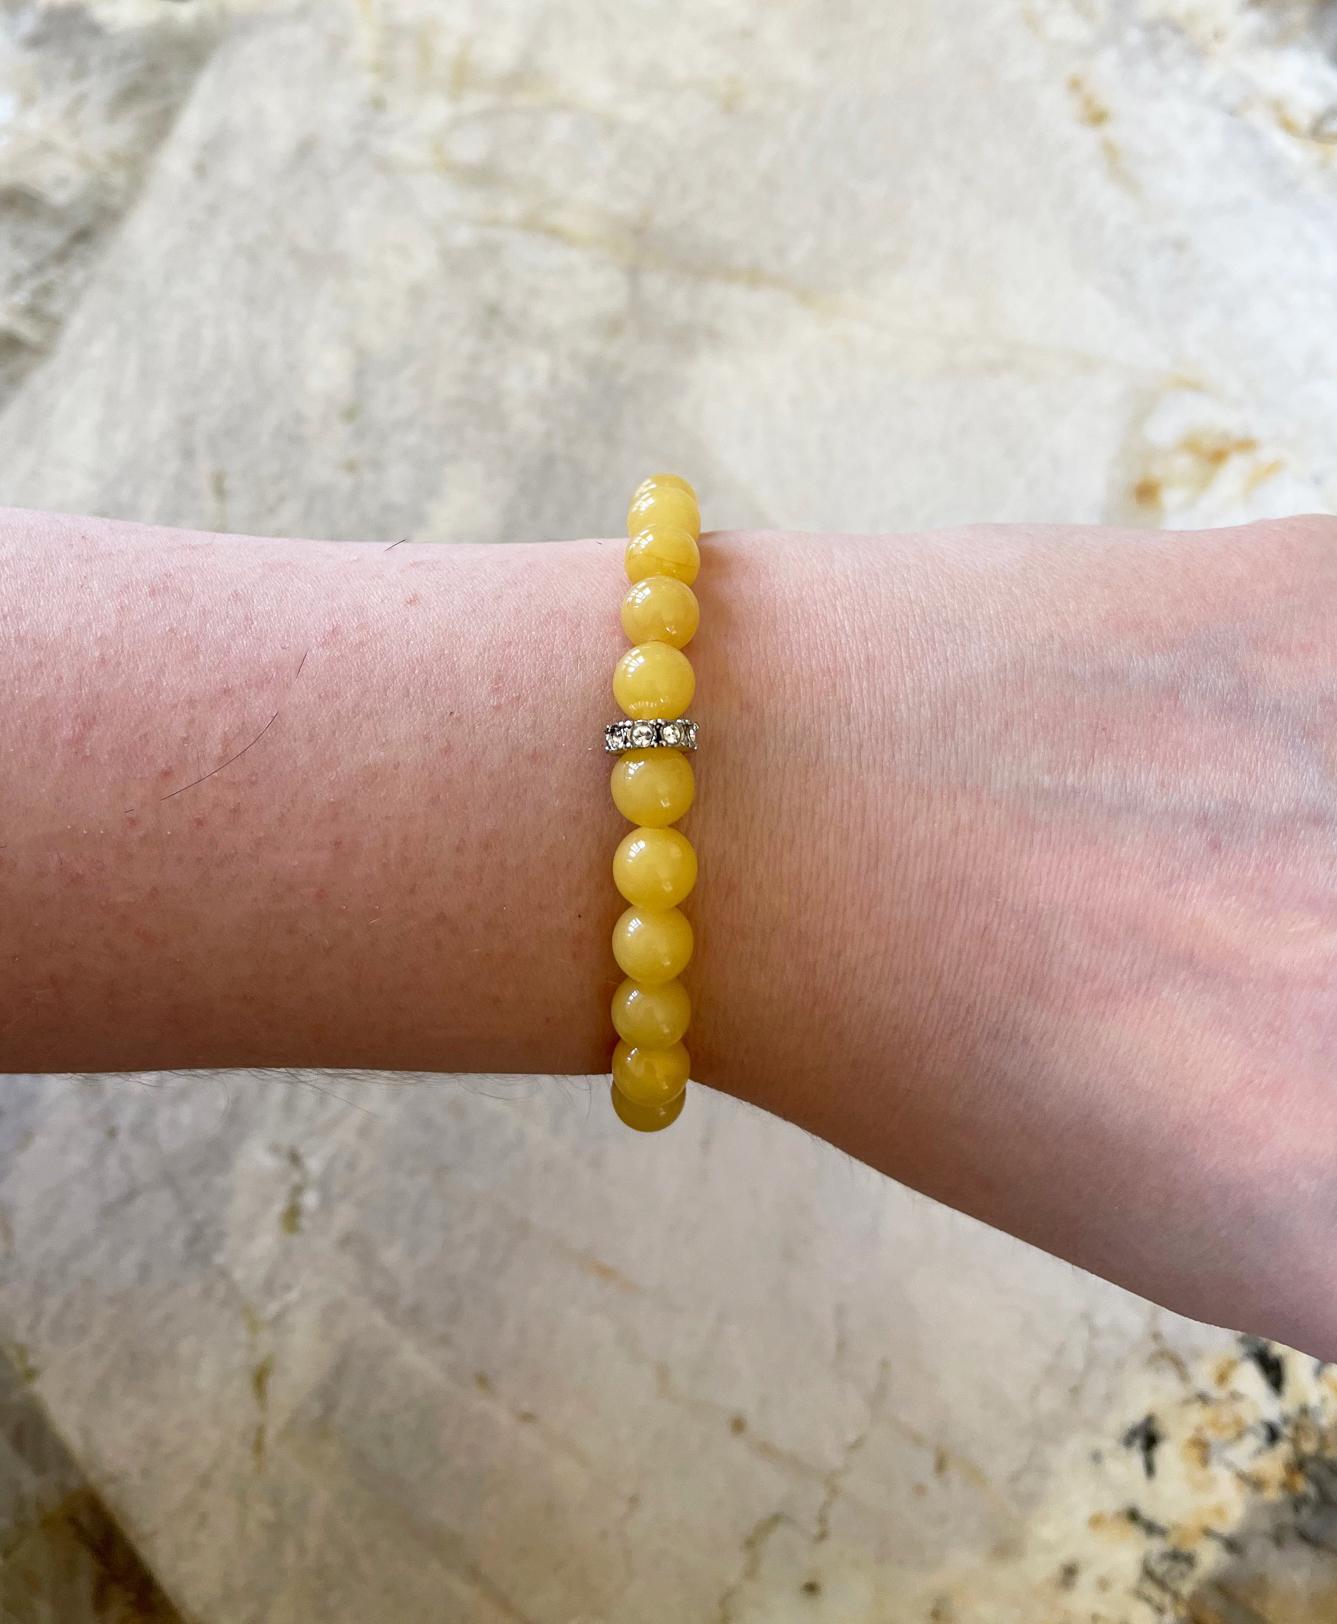 Stunning stretch stacking bracelet made with round egg yolk Baltic amber (8mm) round beads and a Swarovski crystal accent bead. Handcrafted in the USA by Rocat Designs. This bracelet is approximately 7 inches (17.8 cm) long. The size is perfect on